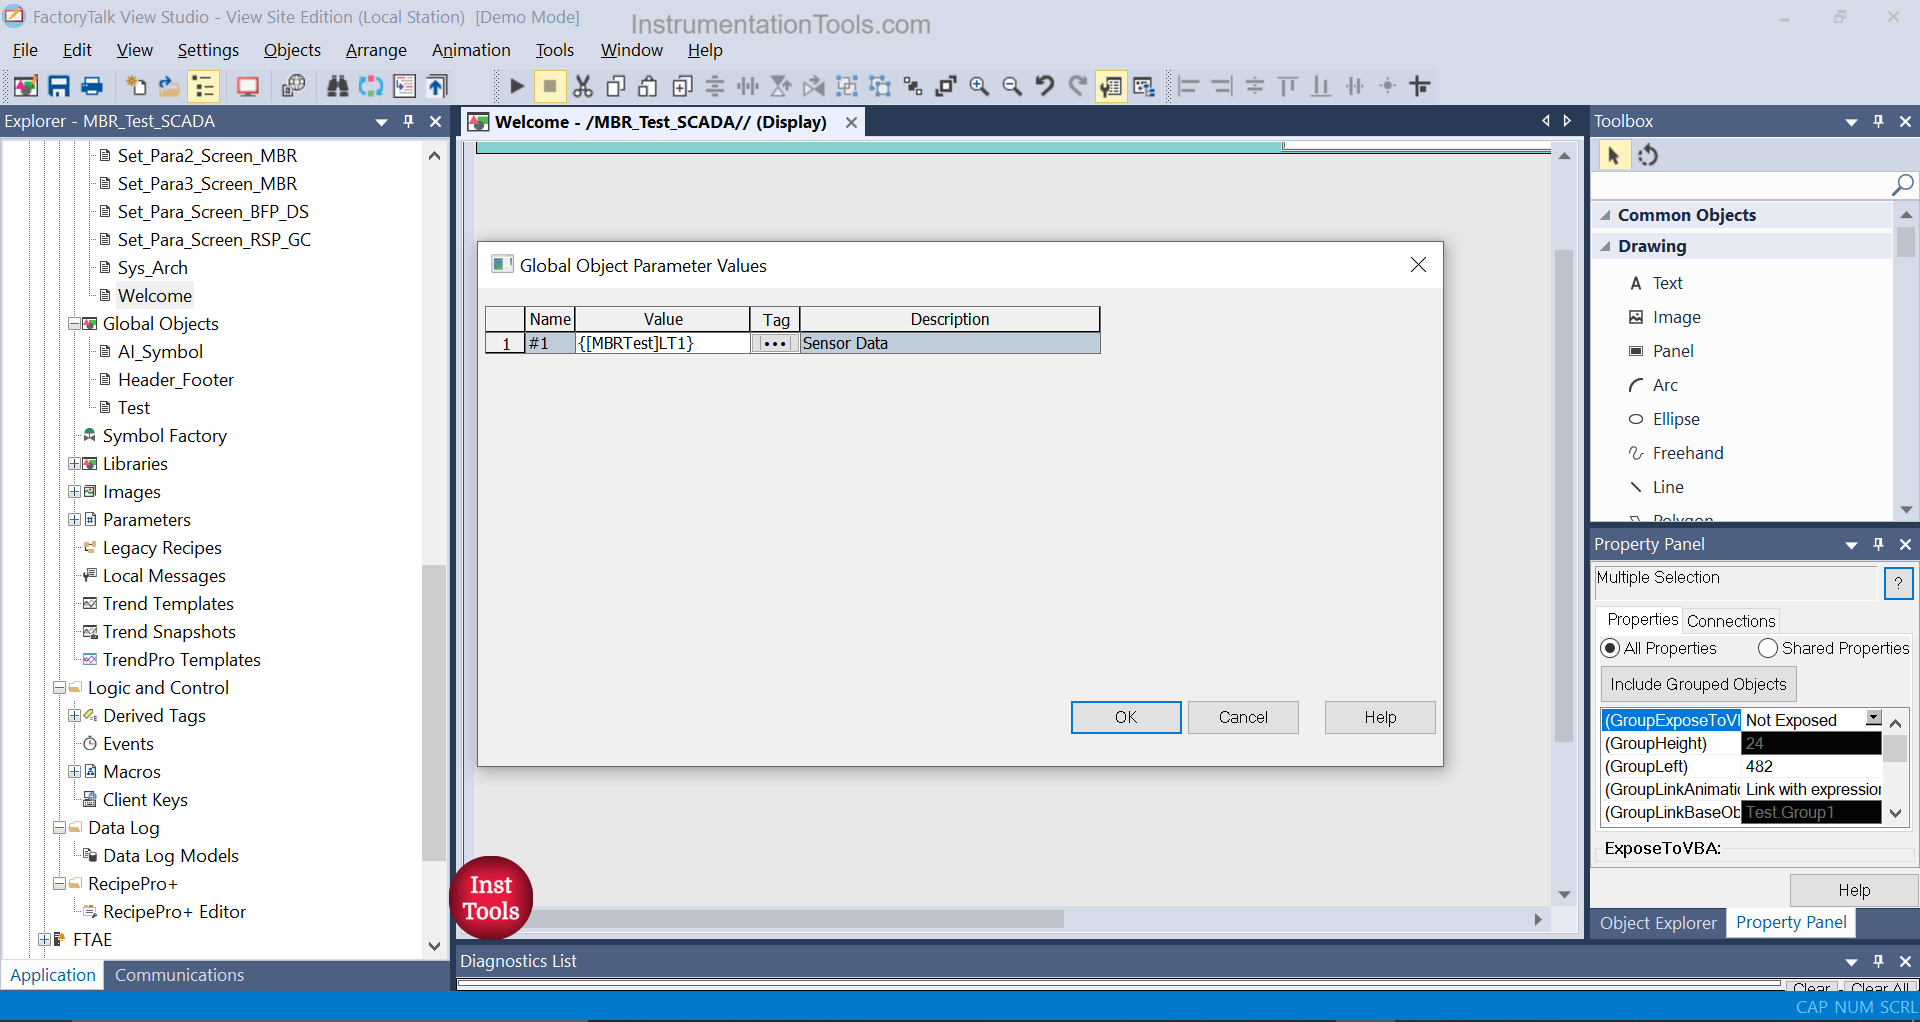 Developing HMI applications in FactoryTalk View